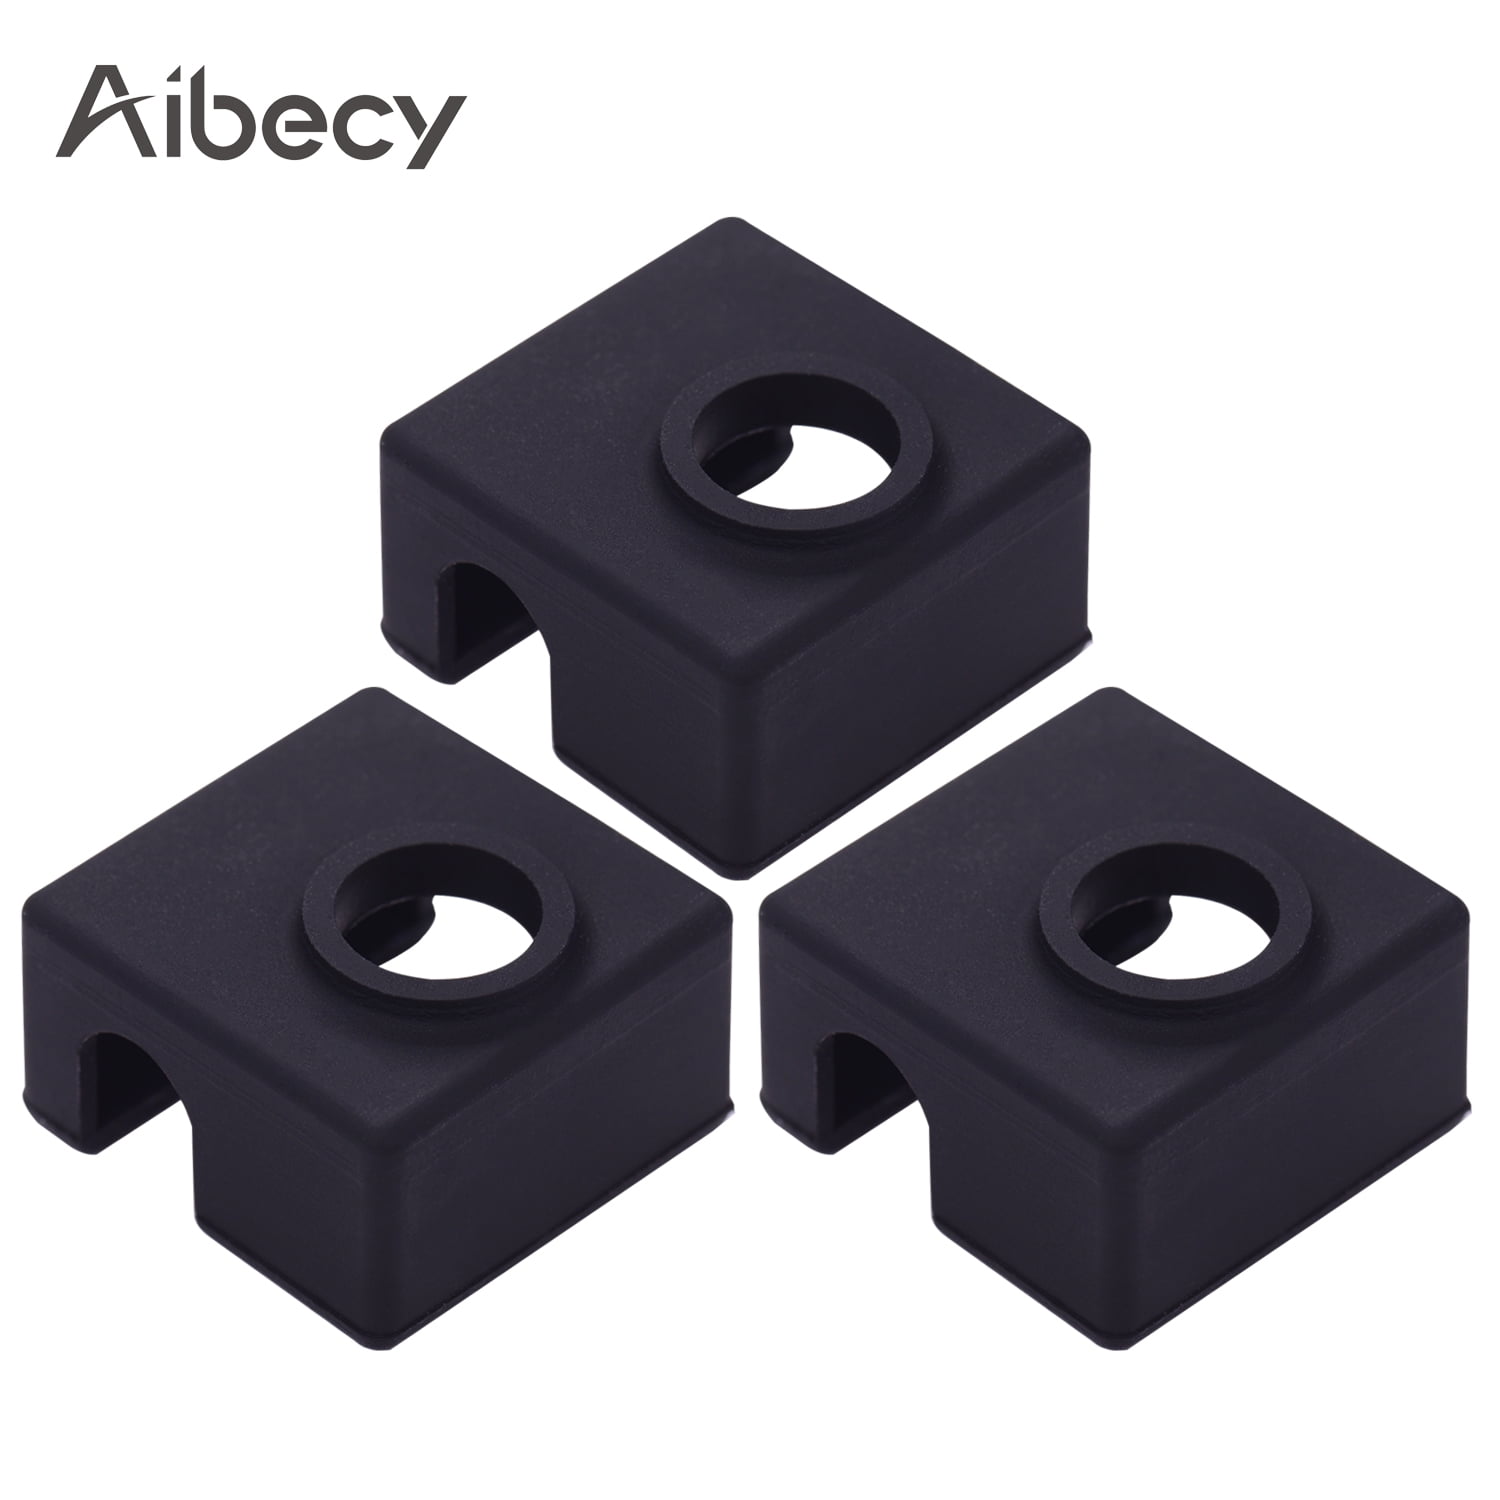 Silicone Heater Block Sleeve Covers Nozzle Accessory For Creality CR-10/Ender 3 